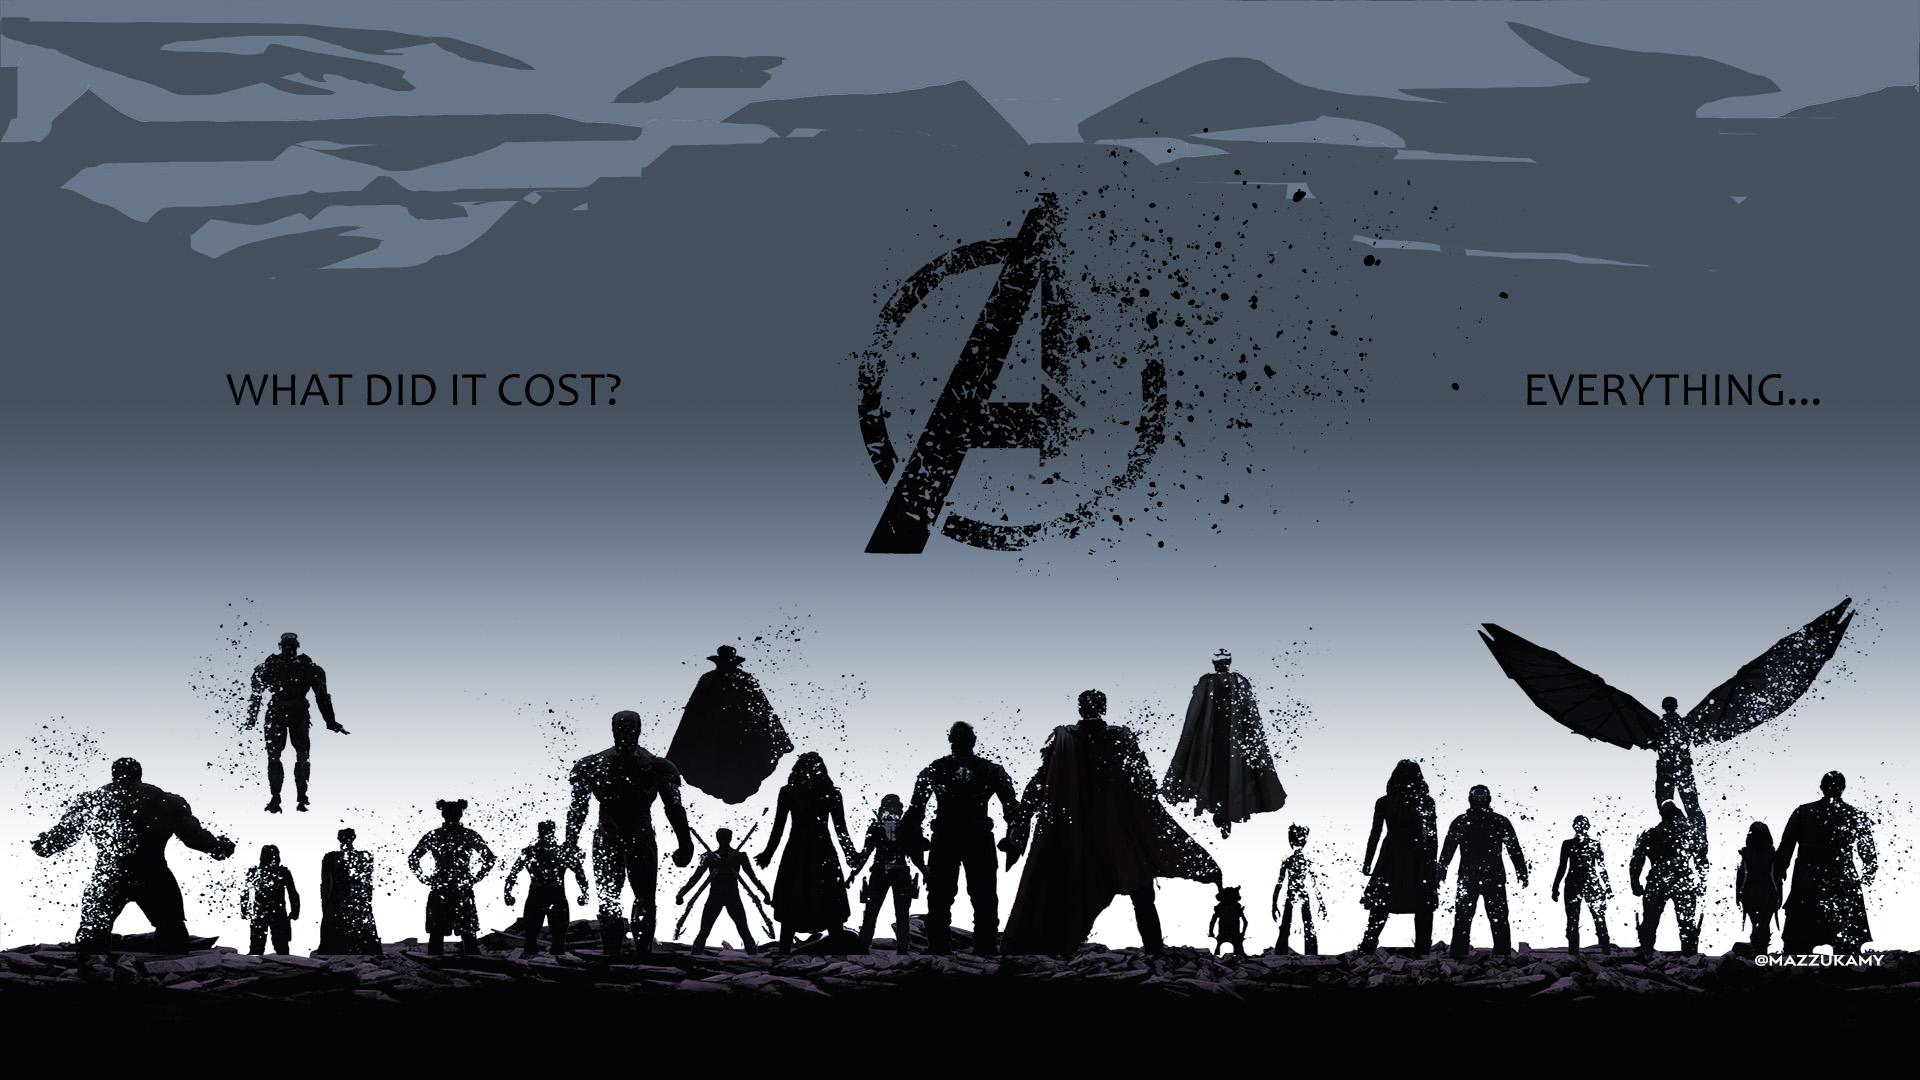 Got inspired by usppro to do an Avengers background as well